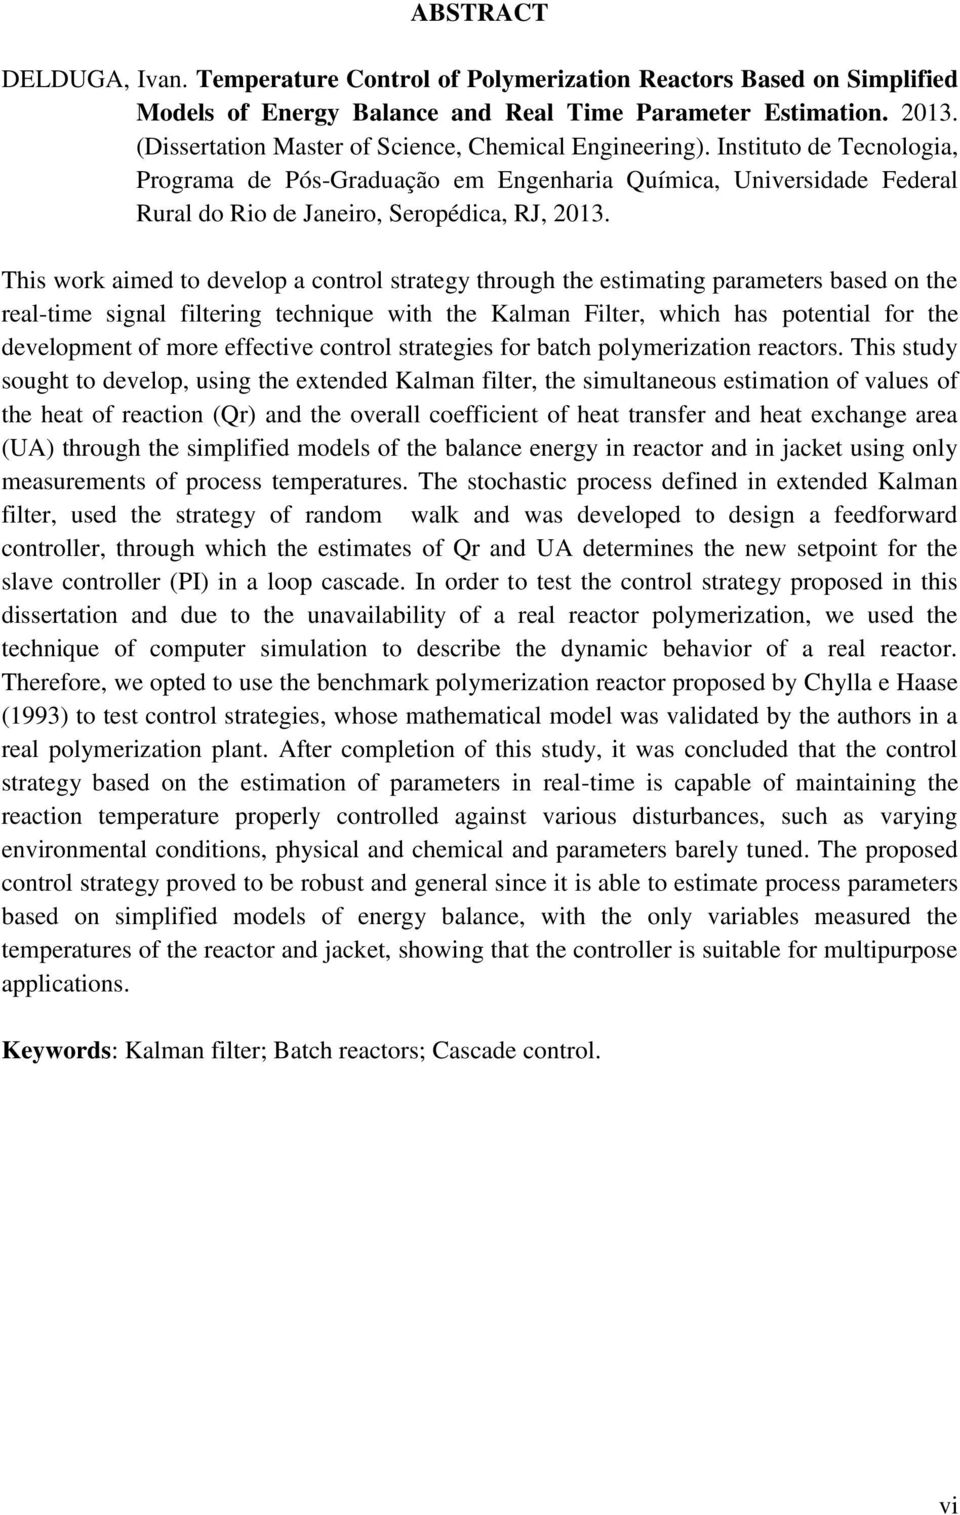 This work aimed to develop a control strategy through the estimating parameters based on the real-time signal filtering technique with the Kalman Filter, which has potential for the development of